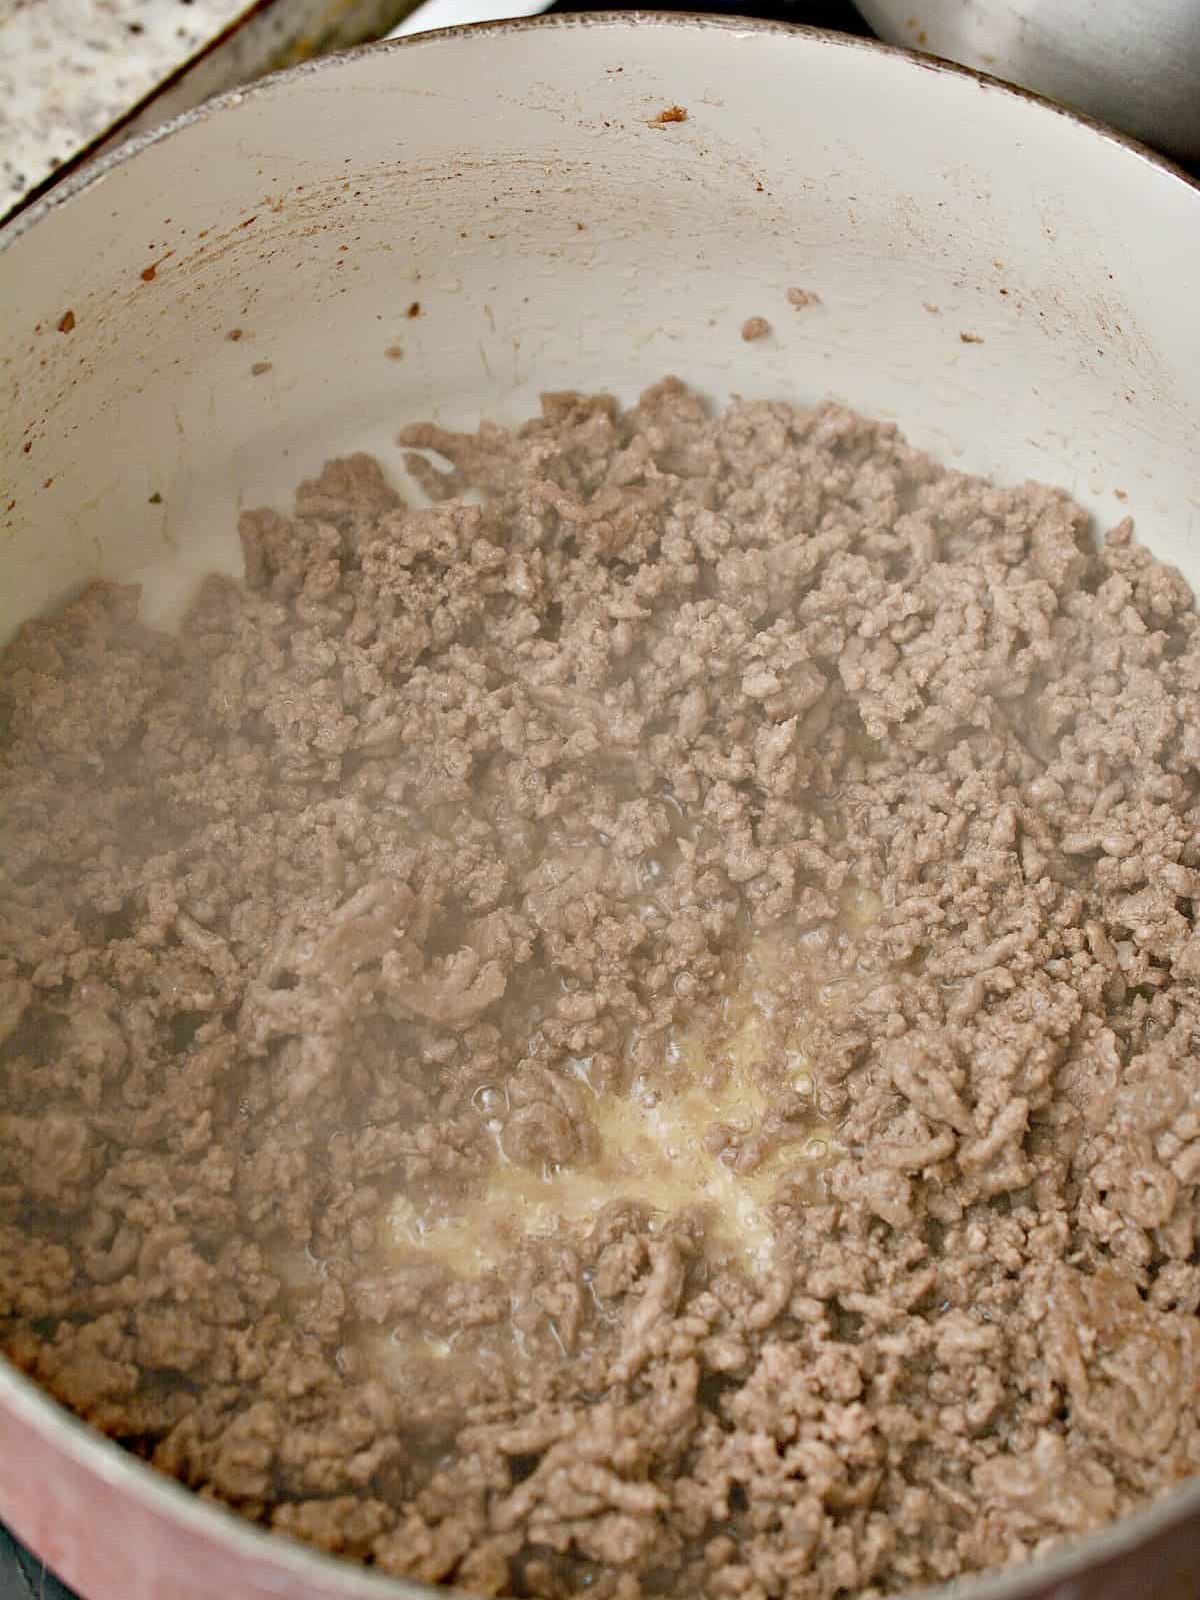 Brown the meat in a large pot over medium-high heat on the stove. Continue to cook until the meat is completely done.